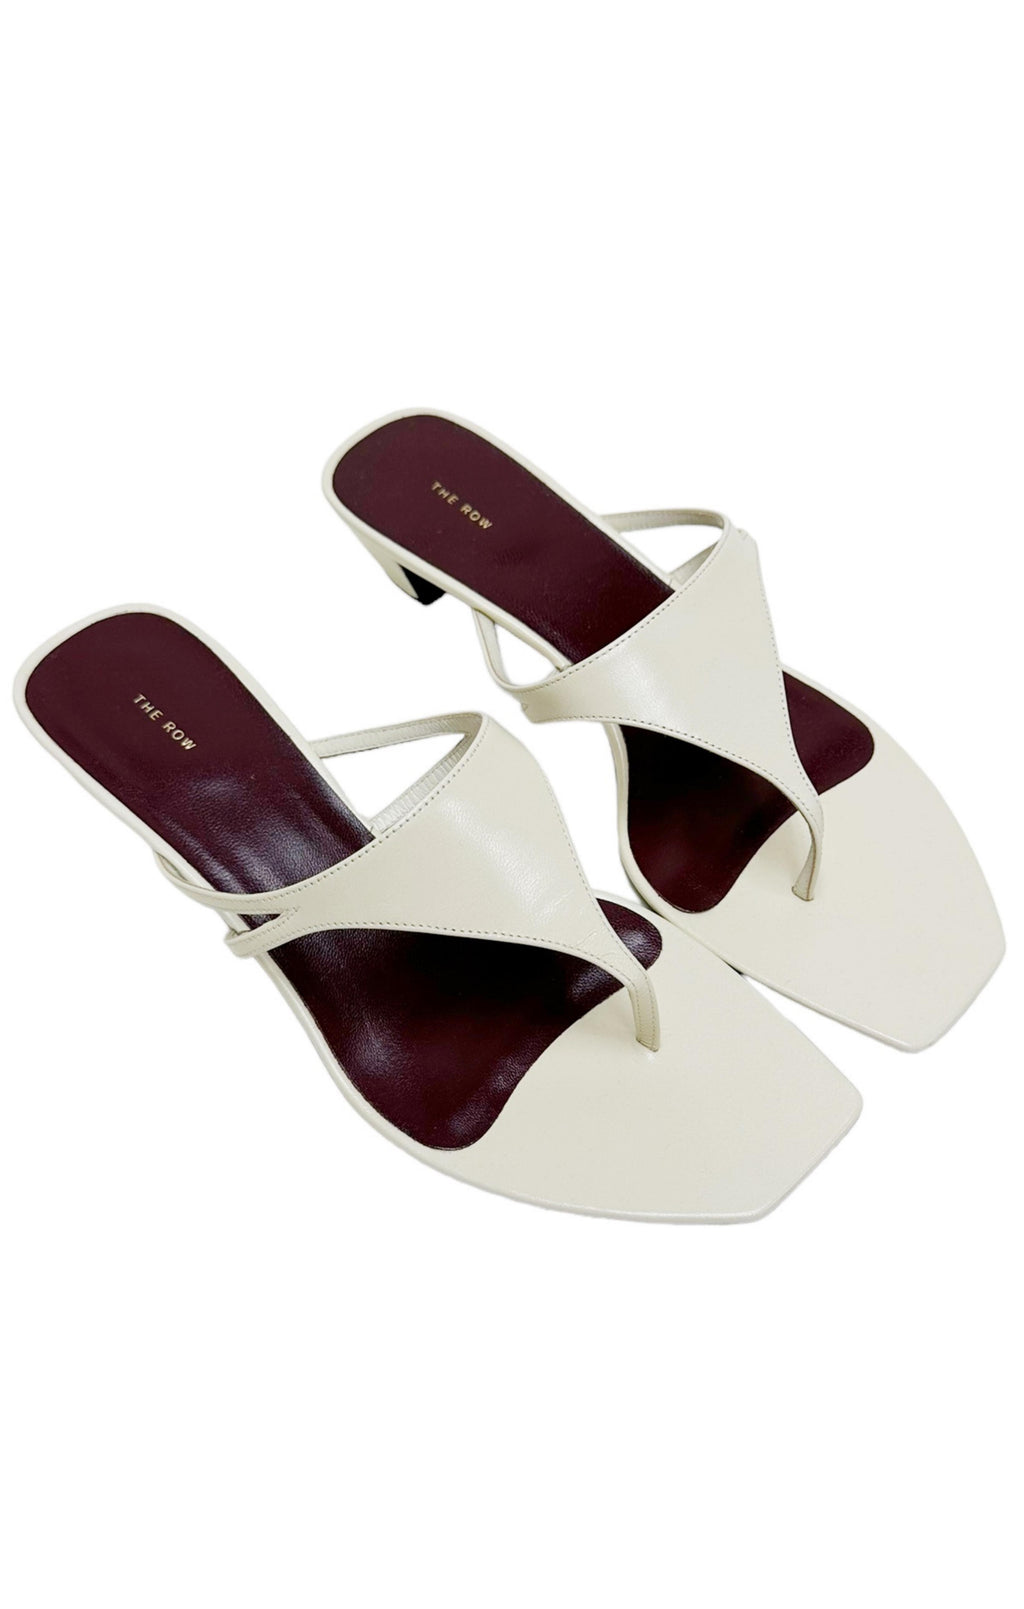 THE ROW (NEW) Sandals Size: EUR 38.5